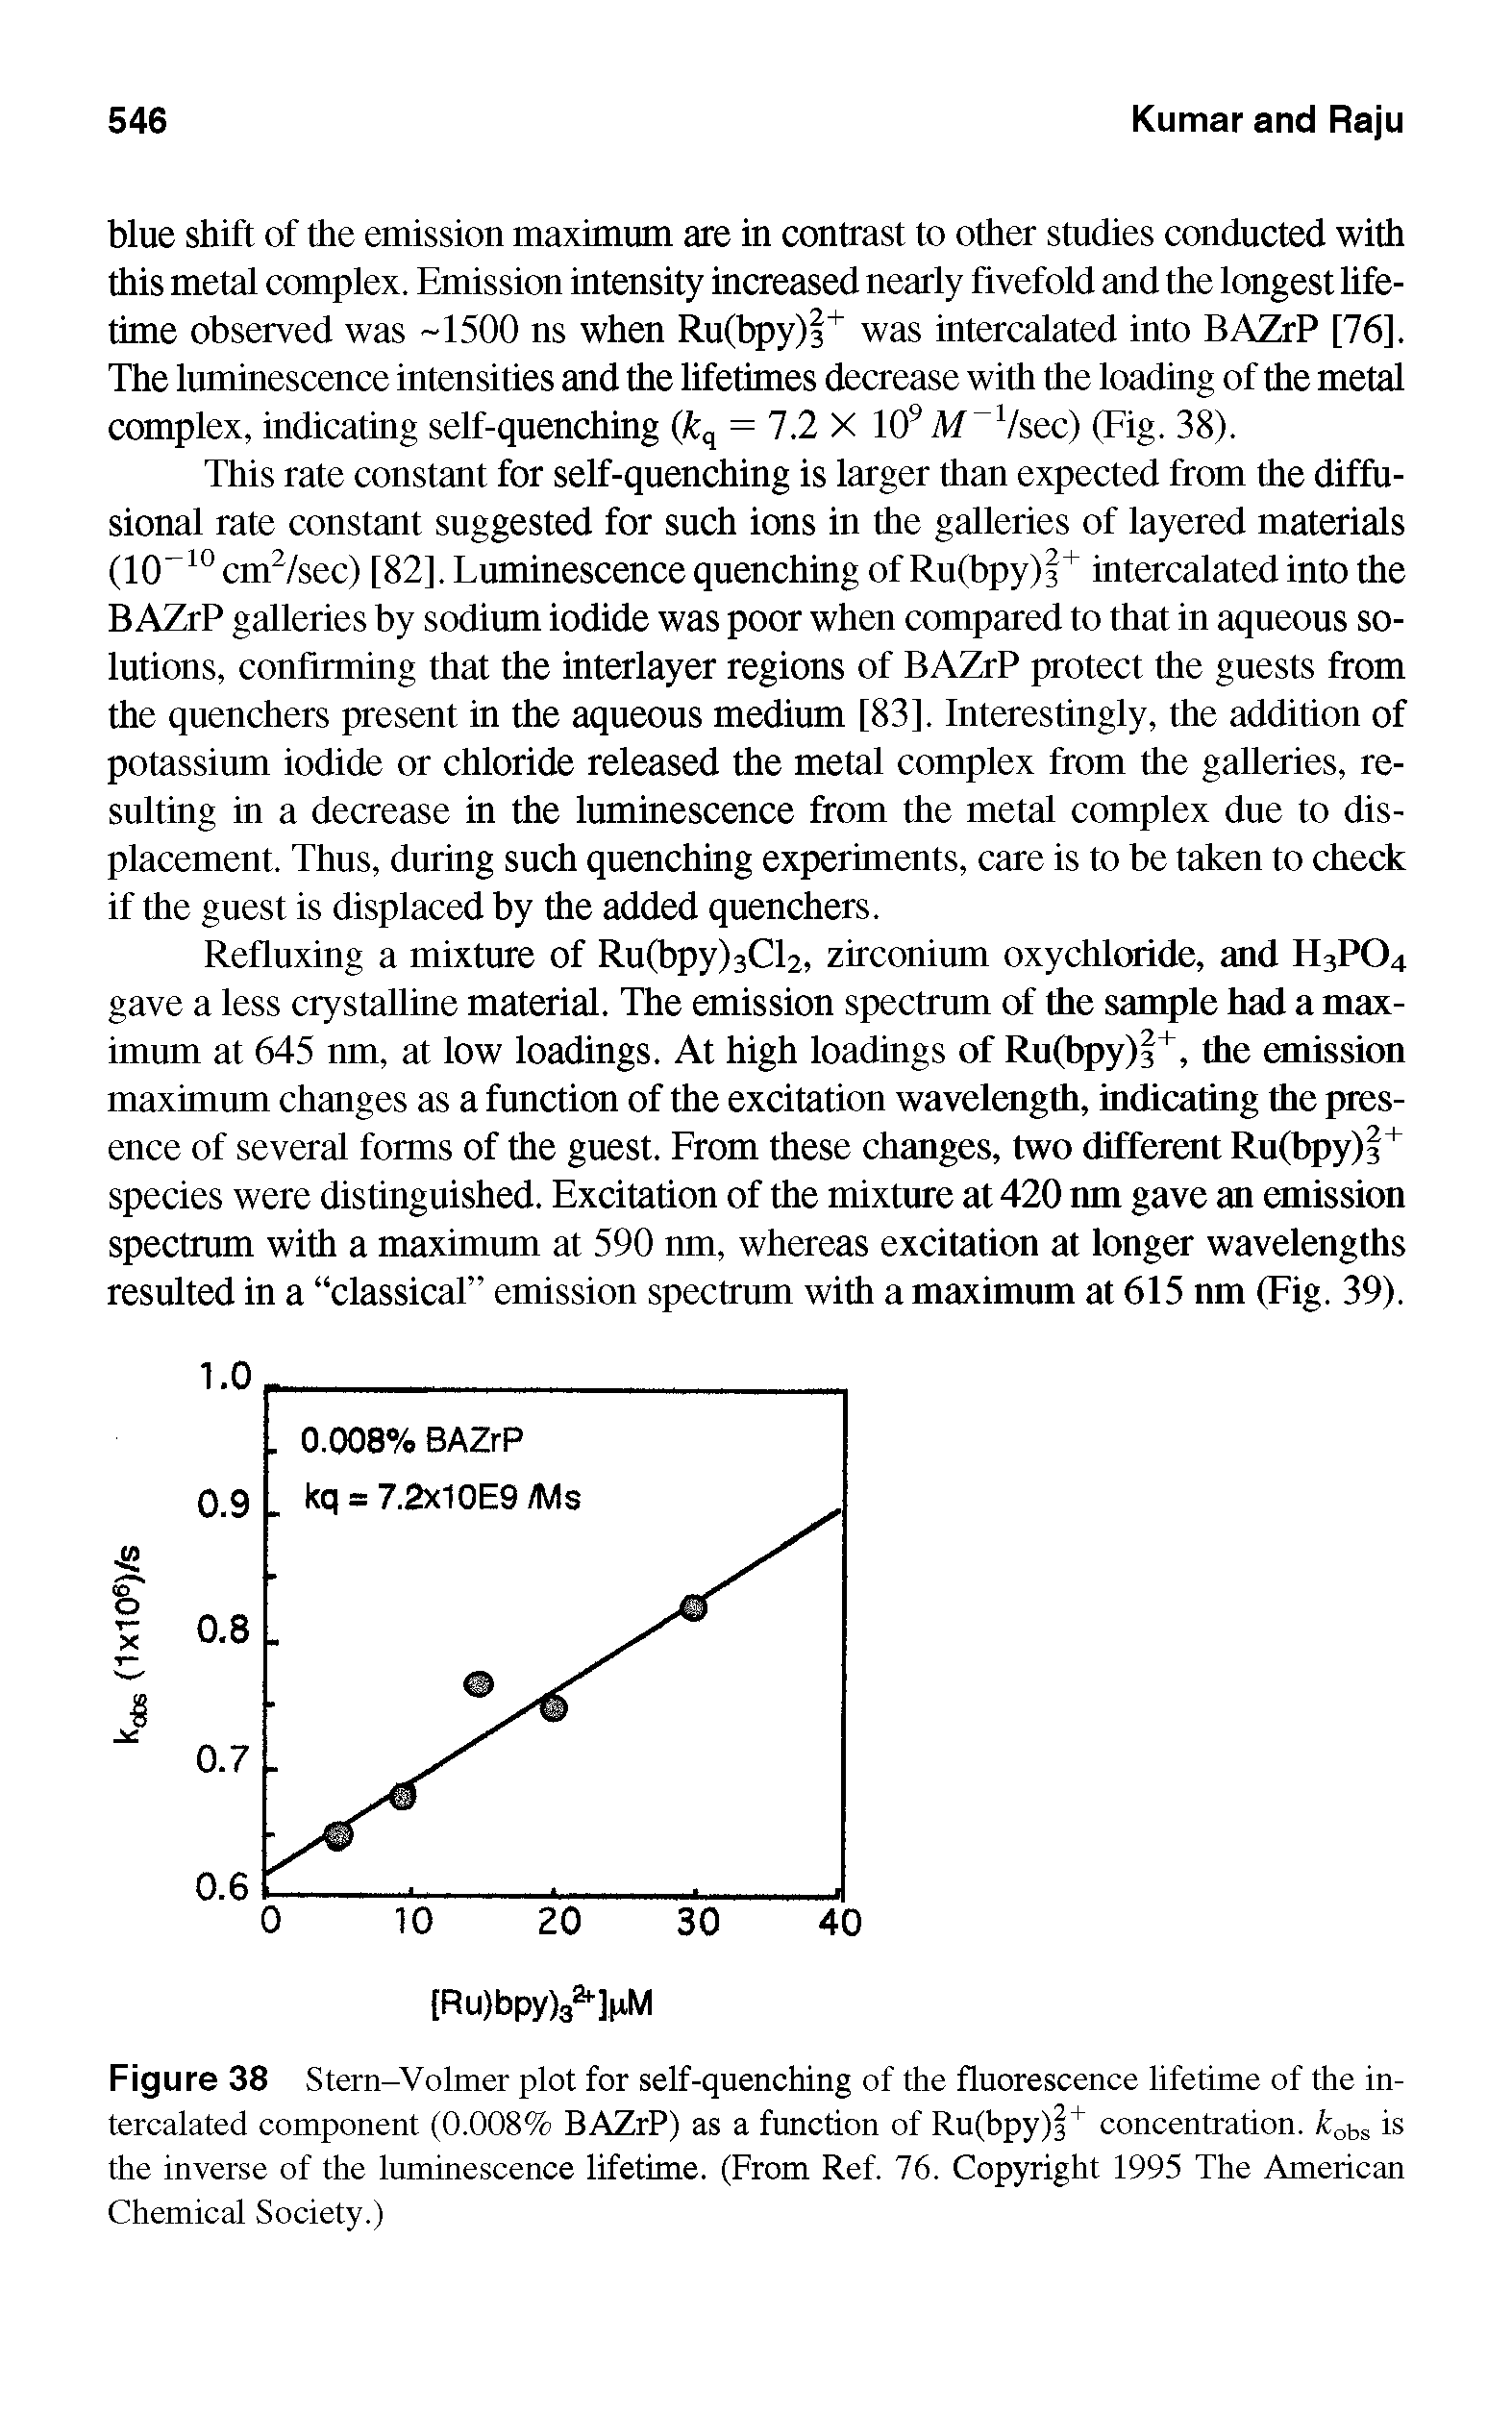 Figure 38 Stern-Volmer plot for self-quenching of the fluorescence lifetime of the intercalated component (0.008% BAZrP) as a function of Ru(bpy)2+ concentration. koha is the inverse of the luminescence lifetime. (From Ref. 76. Copyright 1995 The American Chemical Society.)...